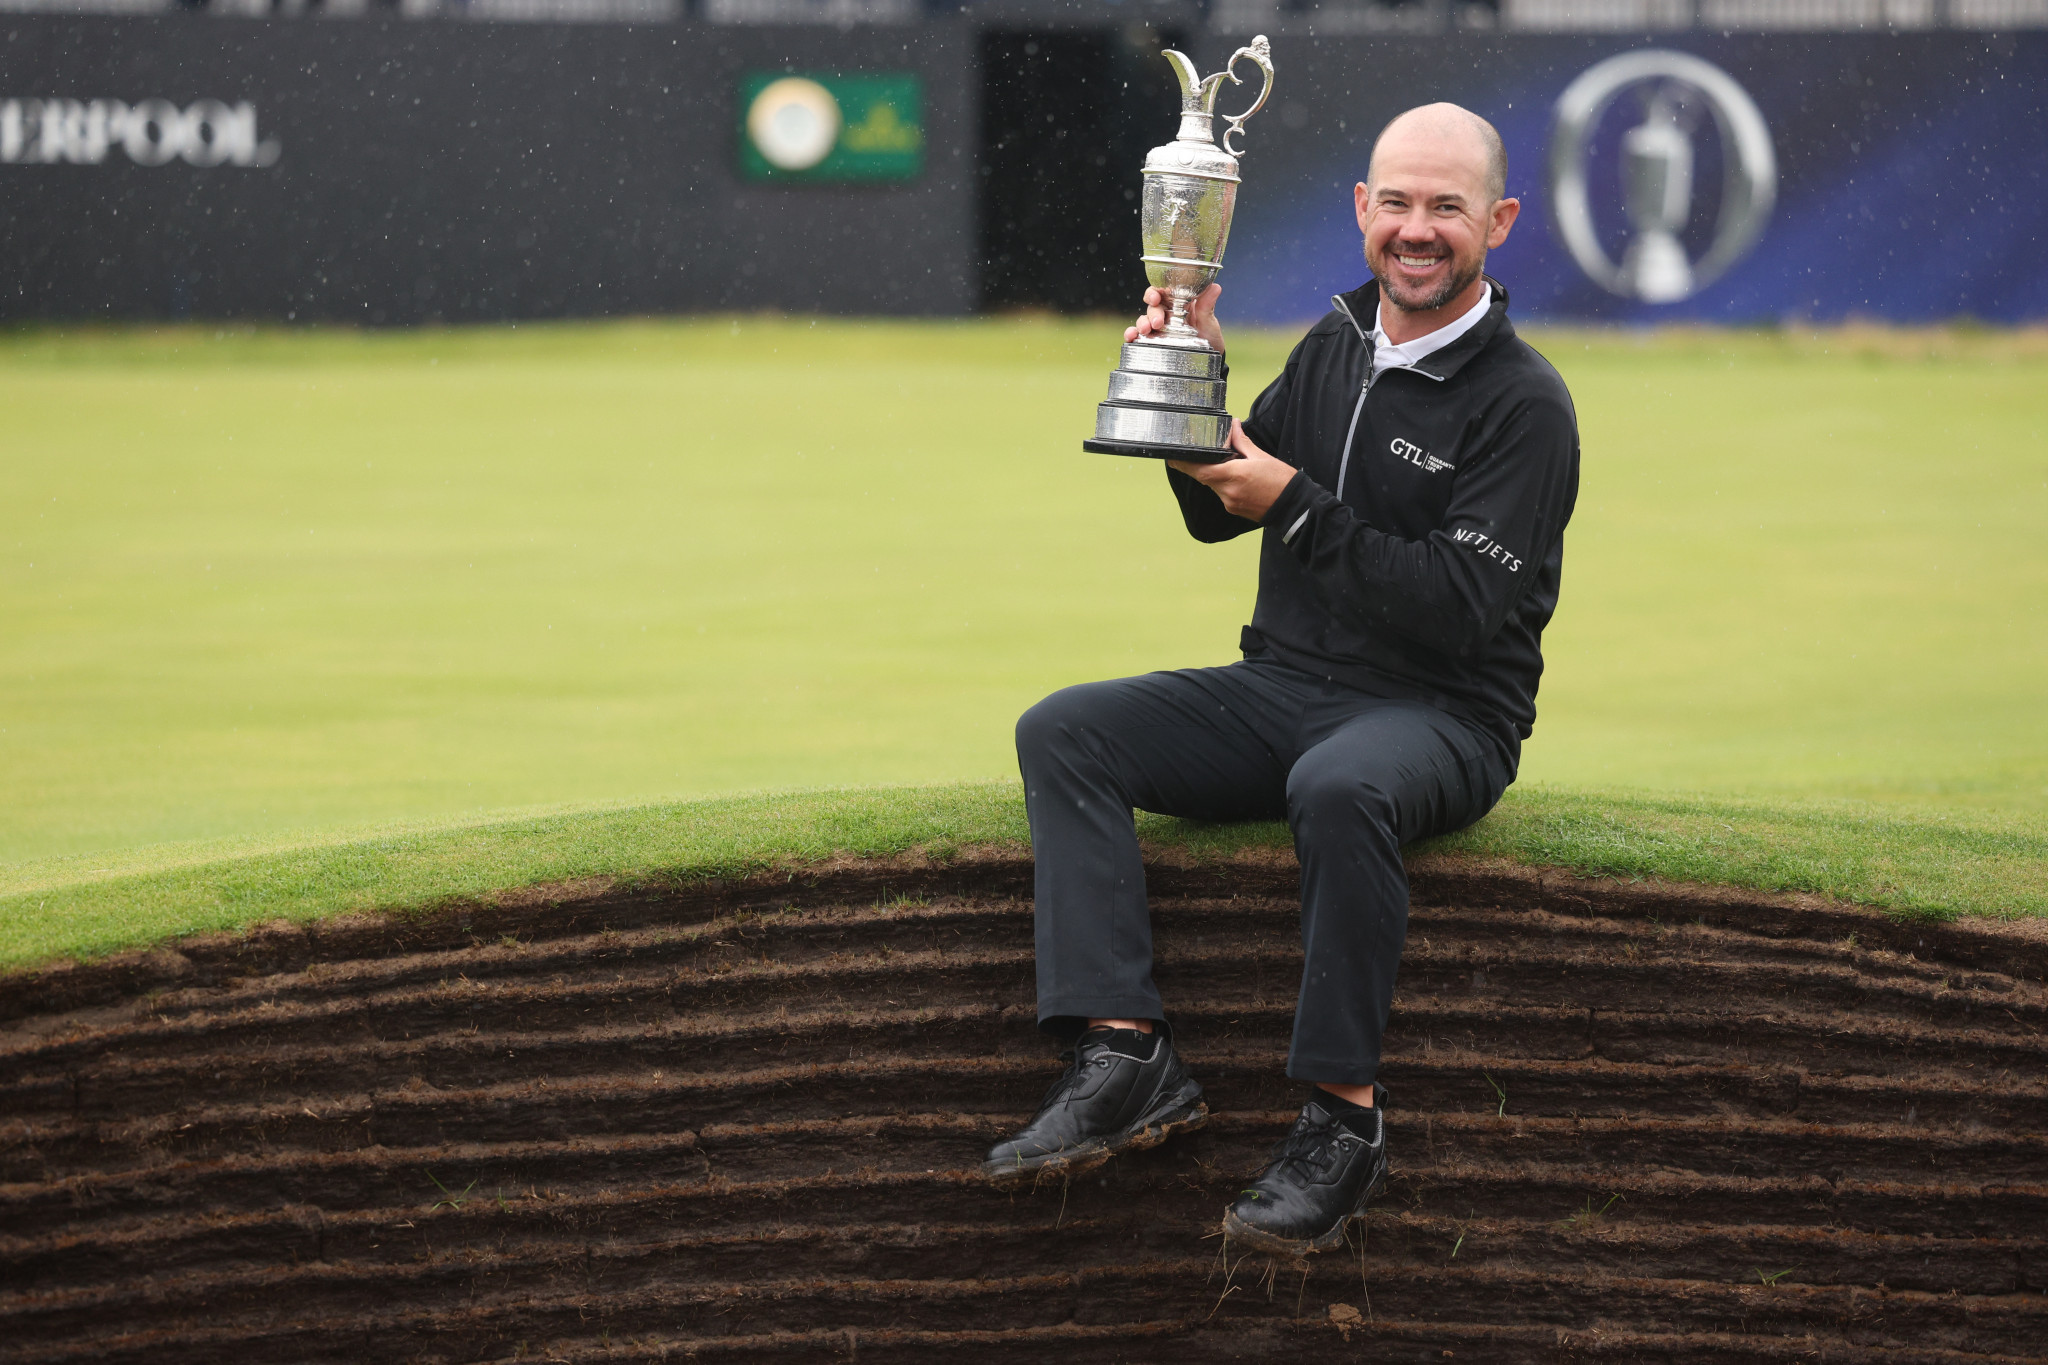 Harman wins first major title as he claims golf’s Open Championship by six shots